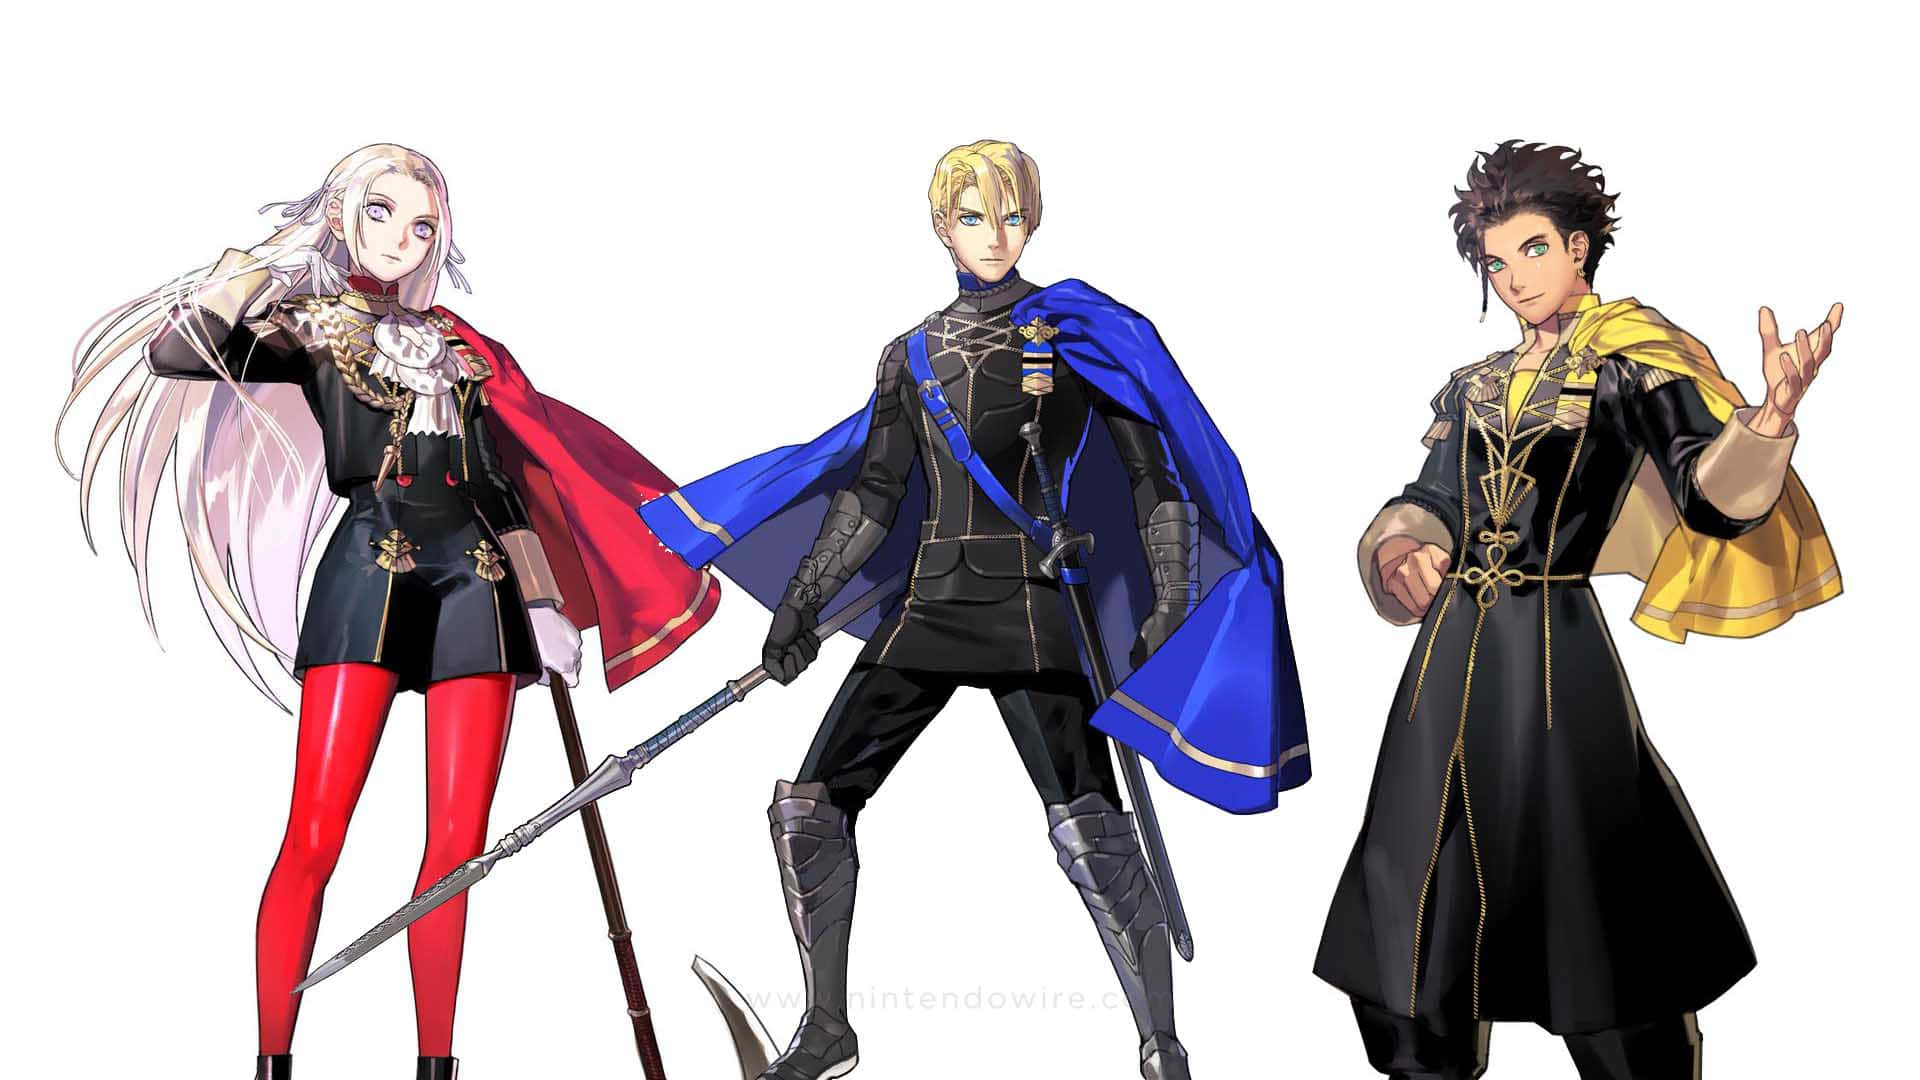 “Unlock Your Path Through Adversity with Fire Emblem Three Houses”